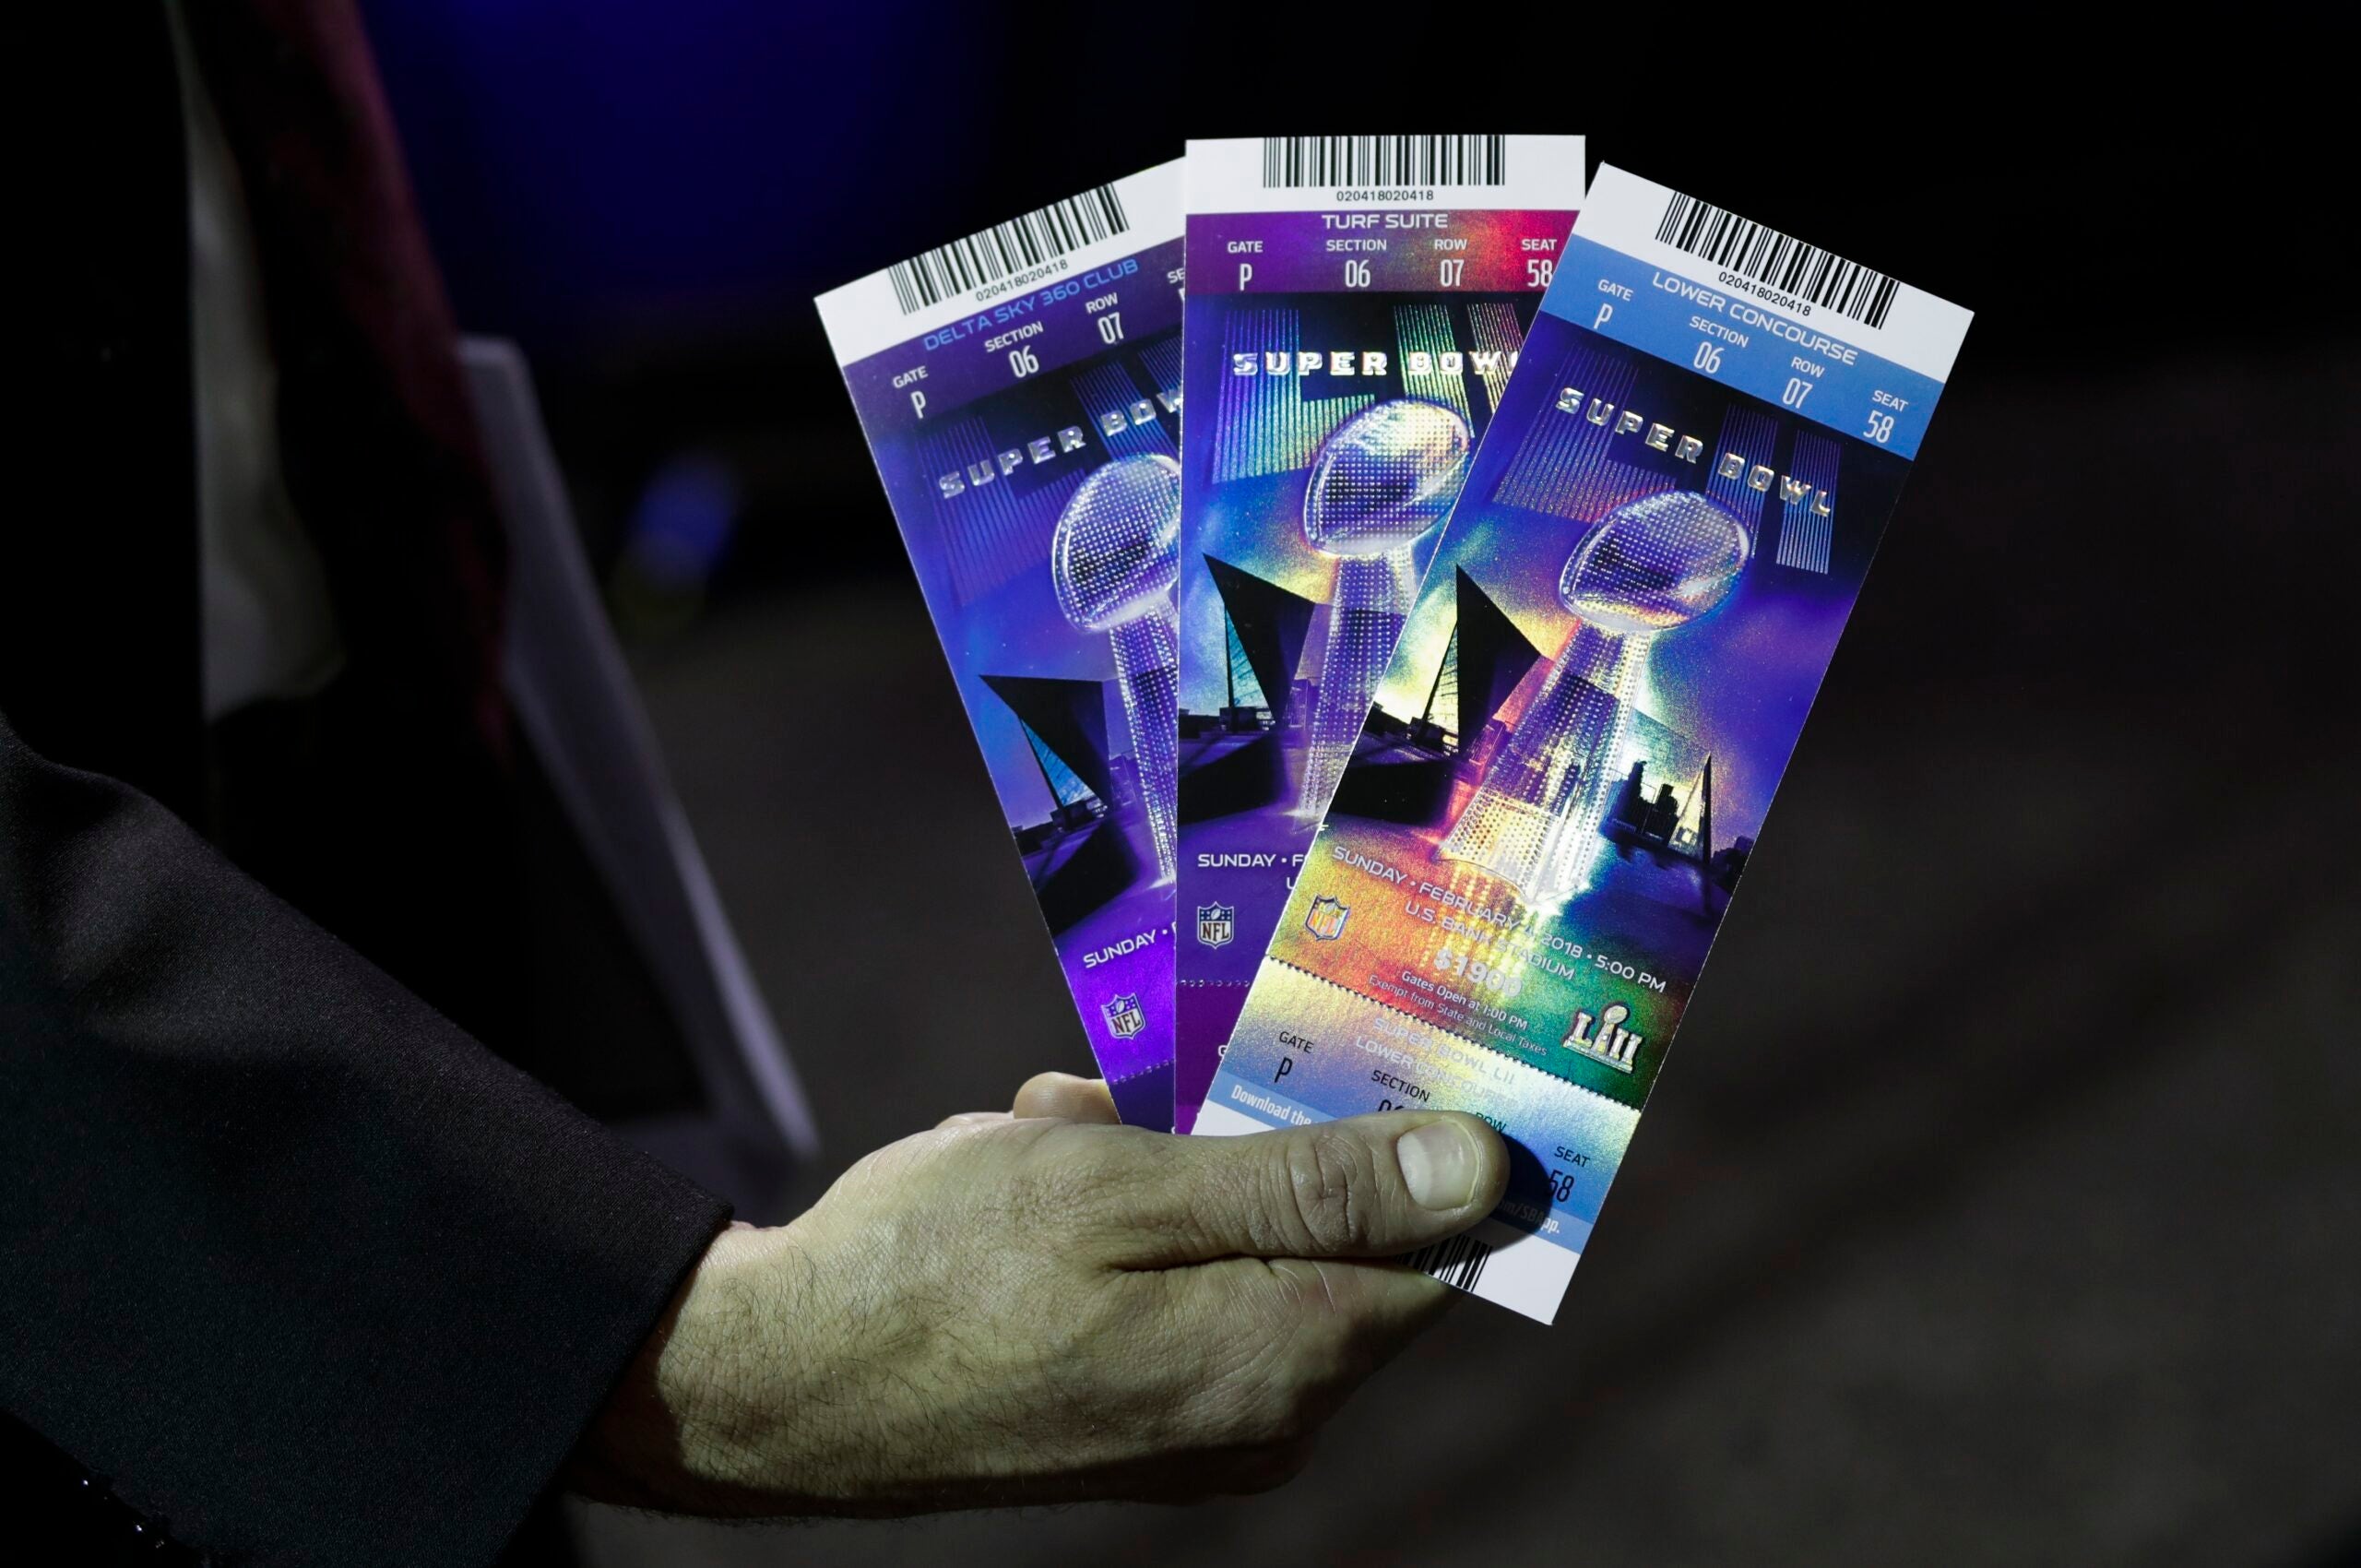 last year super bowl ticket prices